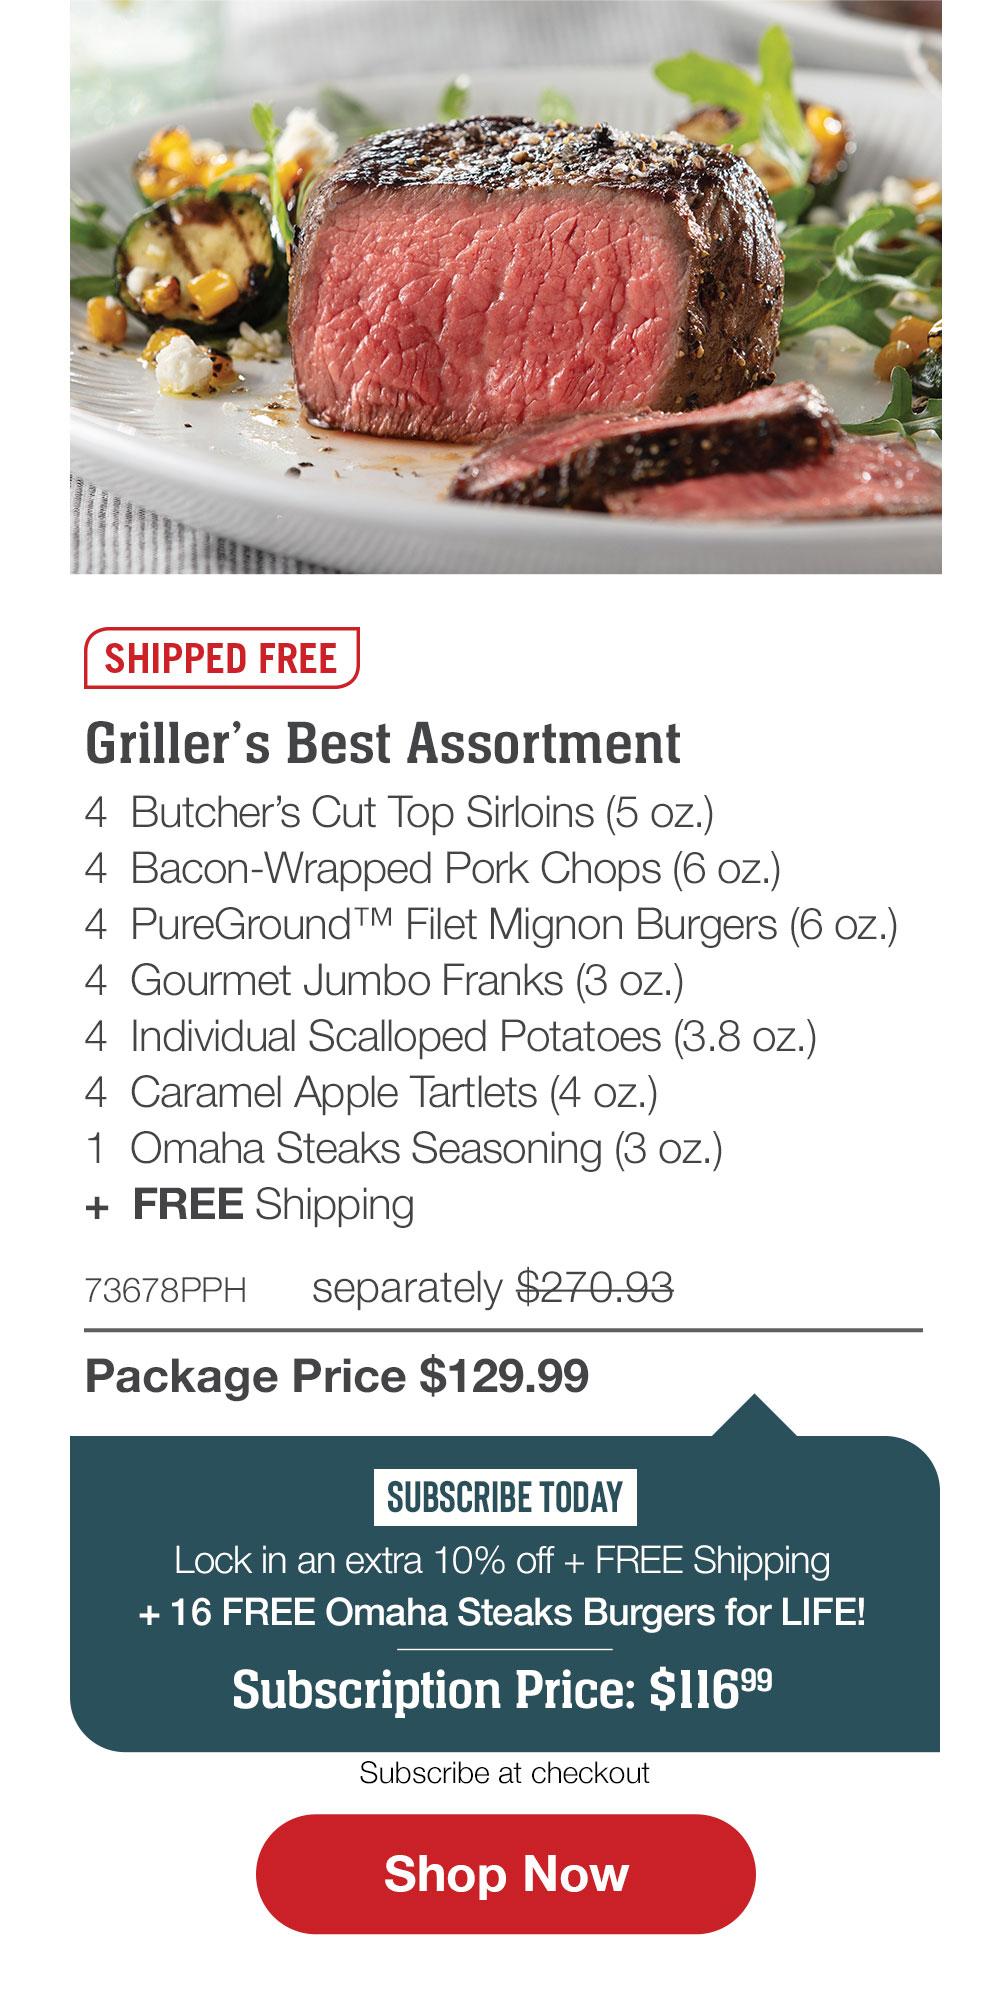 SHIPPED FREE | Griller�s Best Assortment - 4 Butcher�s Cut Top Sirloins (5 oz.) - 4 Bacon-Wrapped Pork Chops (6 oz.) - 4 PureGround� Filet Mignon Burgers (6 oz.) - 4 Gourmet Jumbo Franks (3 oz.) - 4 Individual Scalloped Potatoes (3.8 oz.) - 4 Caramel Apple Tartlets (4 oz.) - 1 Omaha Steaks Seasoning (3 oz.)  +  FREE Shipping - 73678PPH separately $270.93 | Package Price $129.99 | SUBSCRIBE TODAY - Lock in an extra 10% off + FREE Shipping + 16 FREE Omaha Steaks Burgers for LIFE! Subscription Price: $116.99 || SHOP NOW